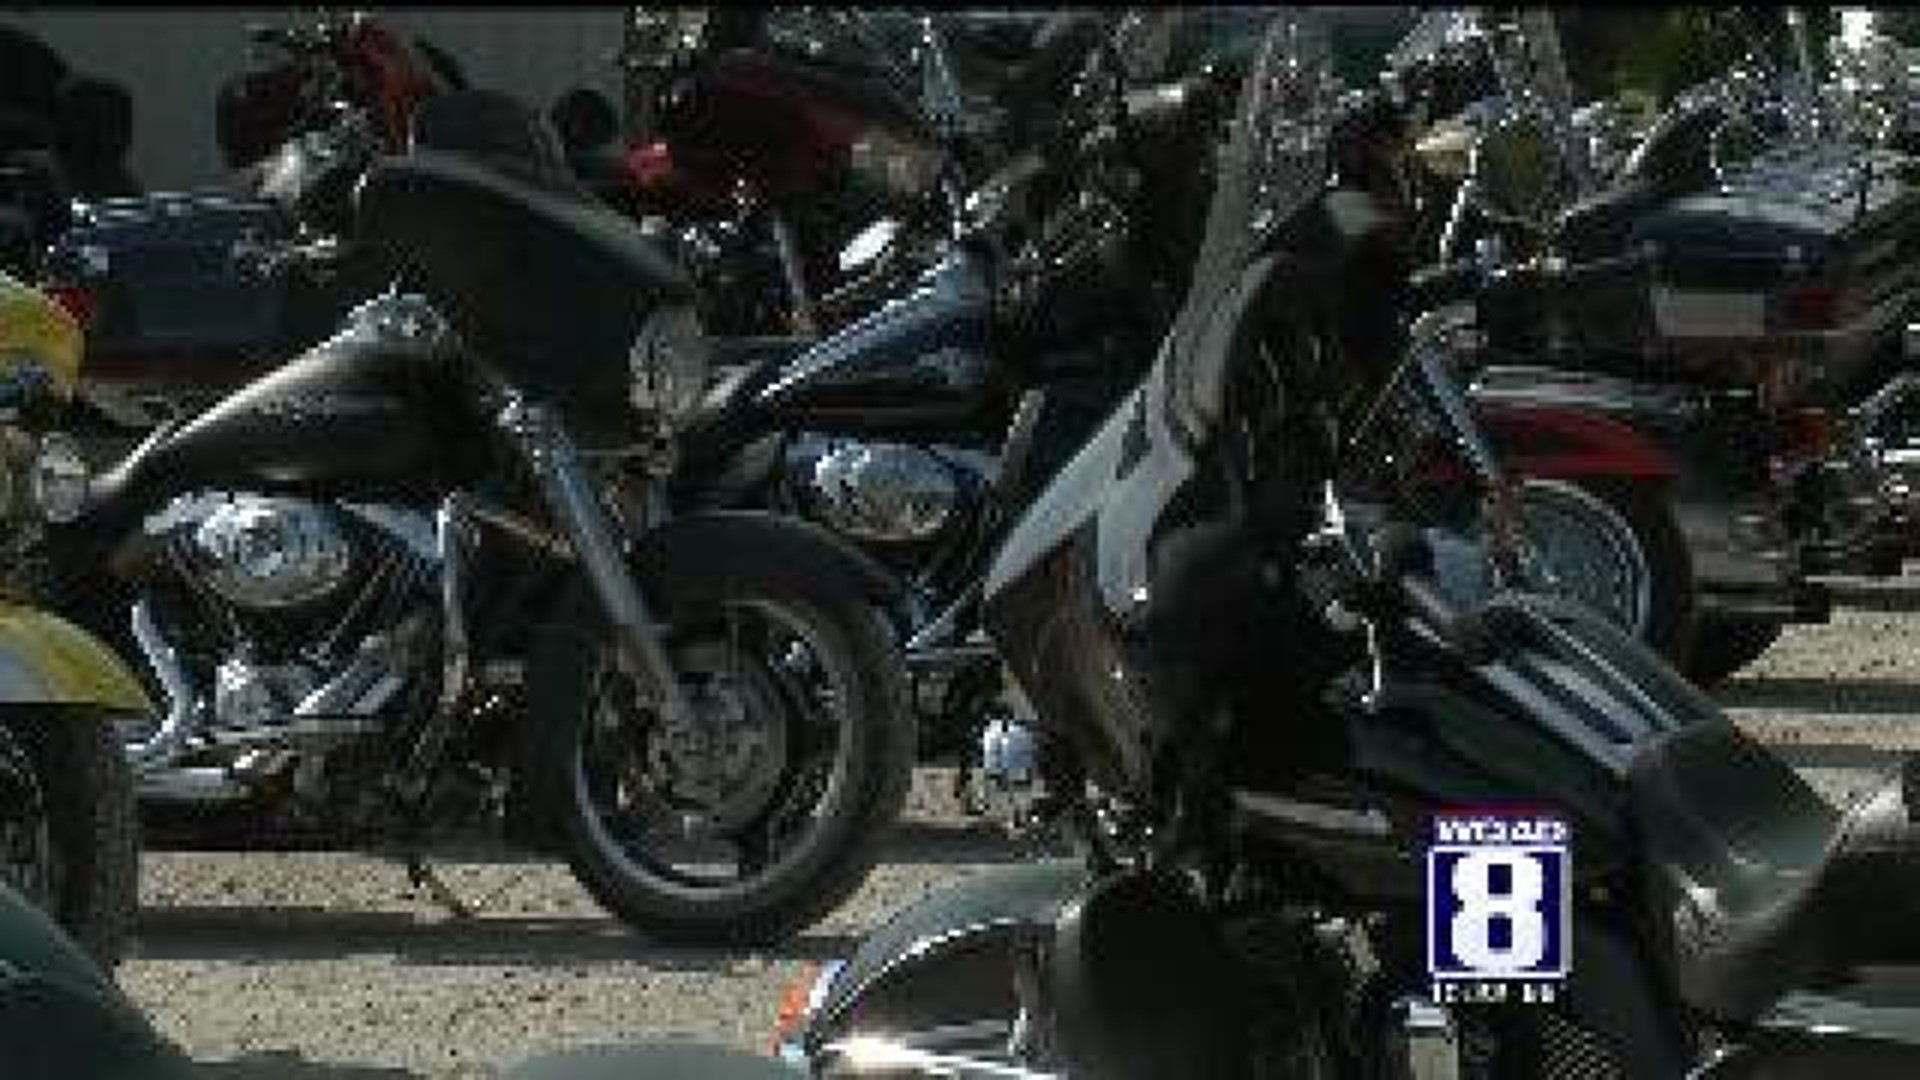 Motorcyclists Ride for Children in Buffalo, IA